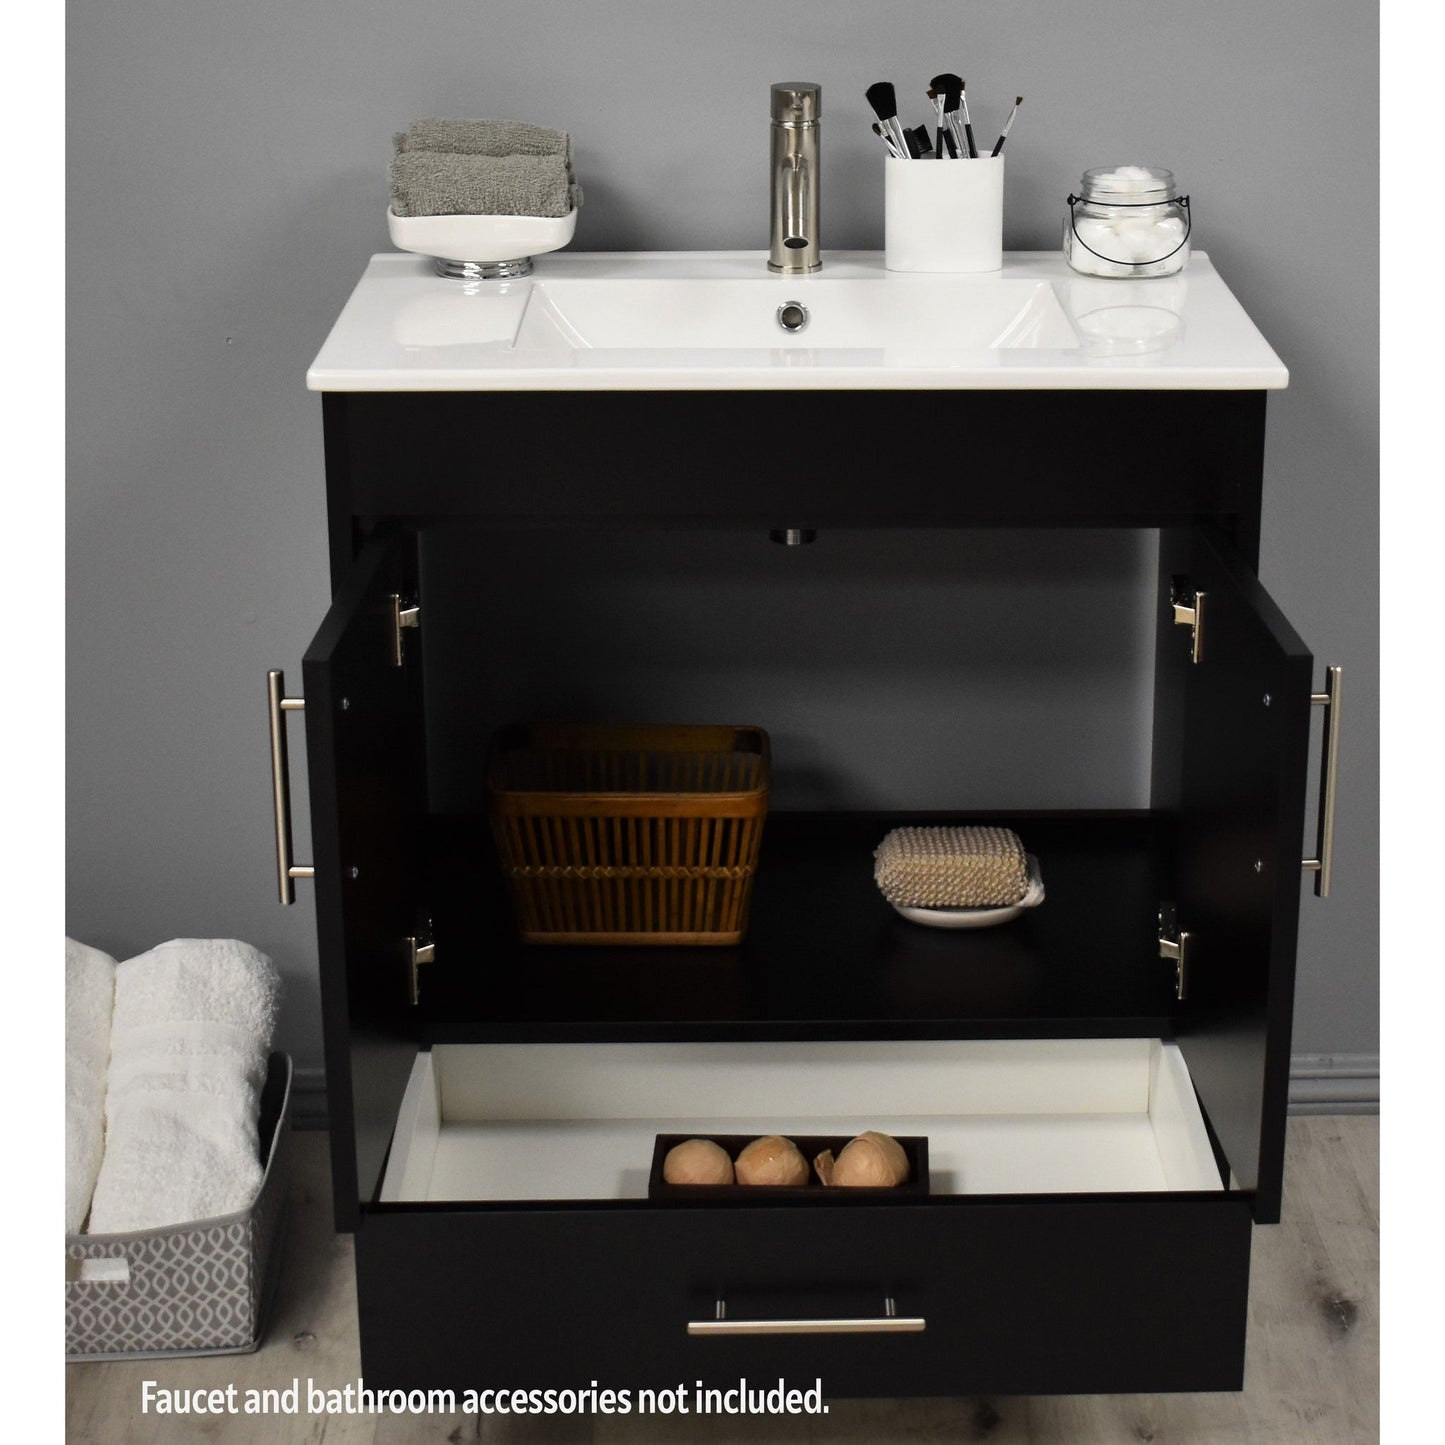 Volpa USA Pacific 30" Black Freestanding Modern Bathroom Vanity With Integrated Ceramic Top and Brushed Nickel Round Handles